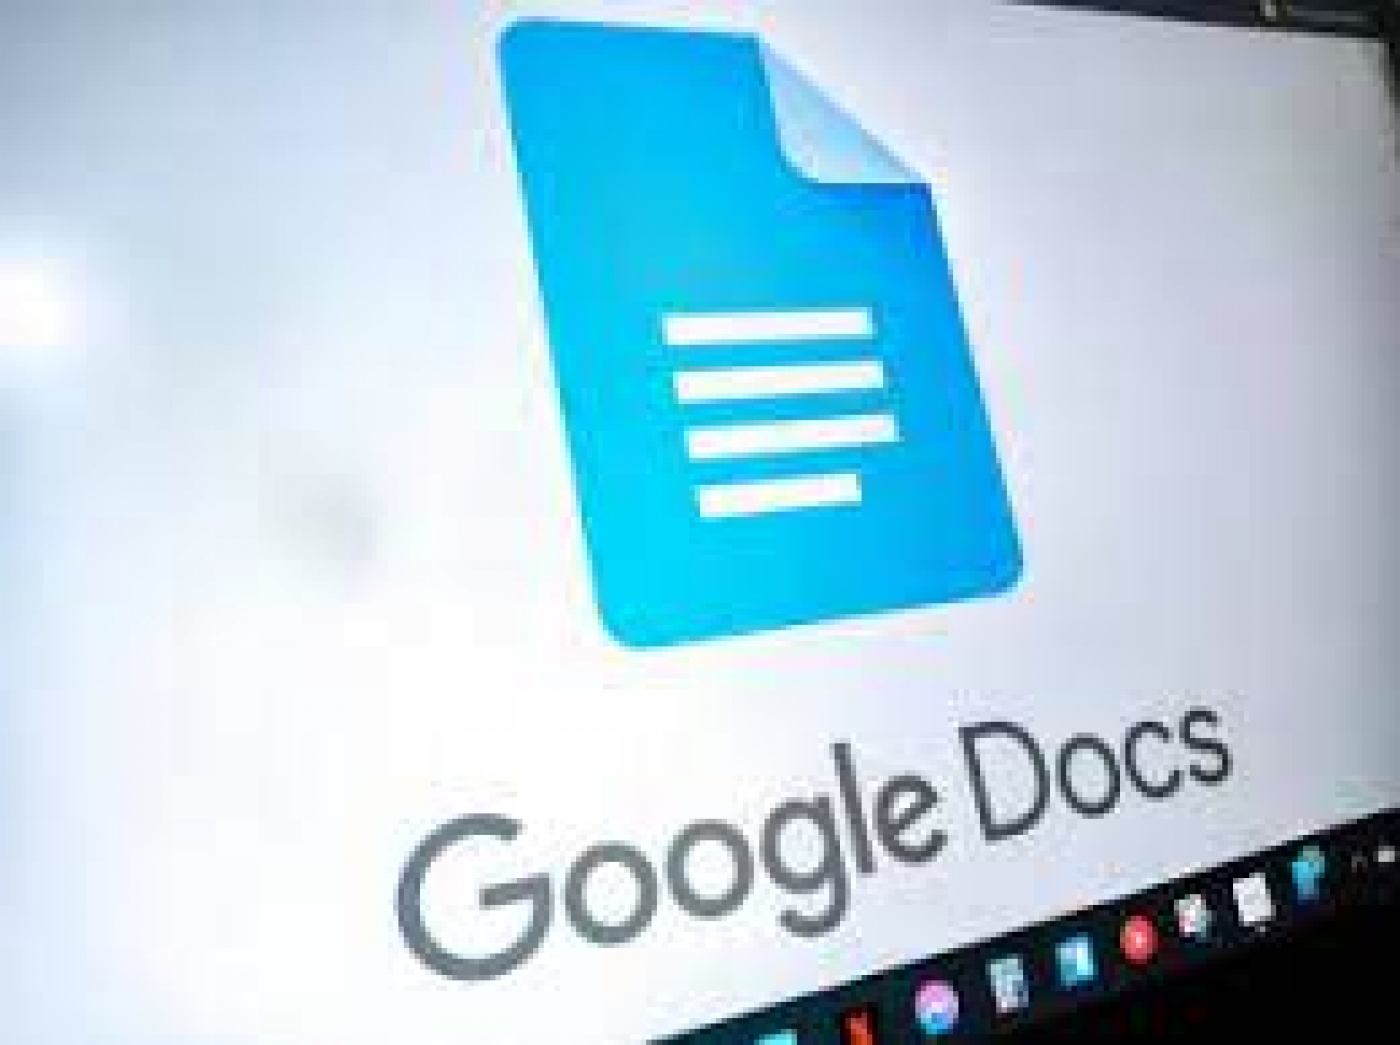 You can now collaborate on emails directly in Google Docs